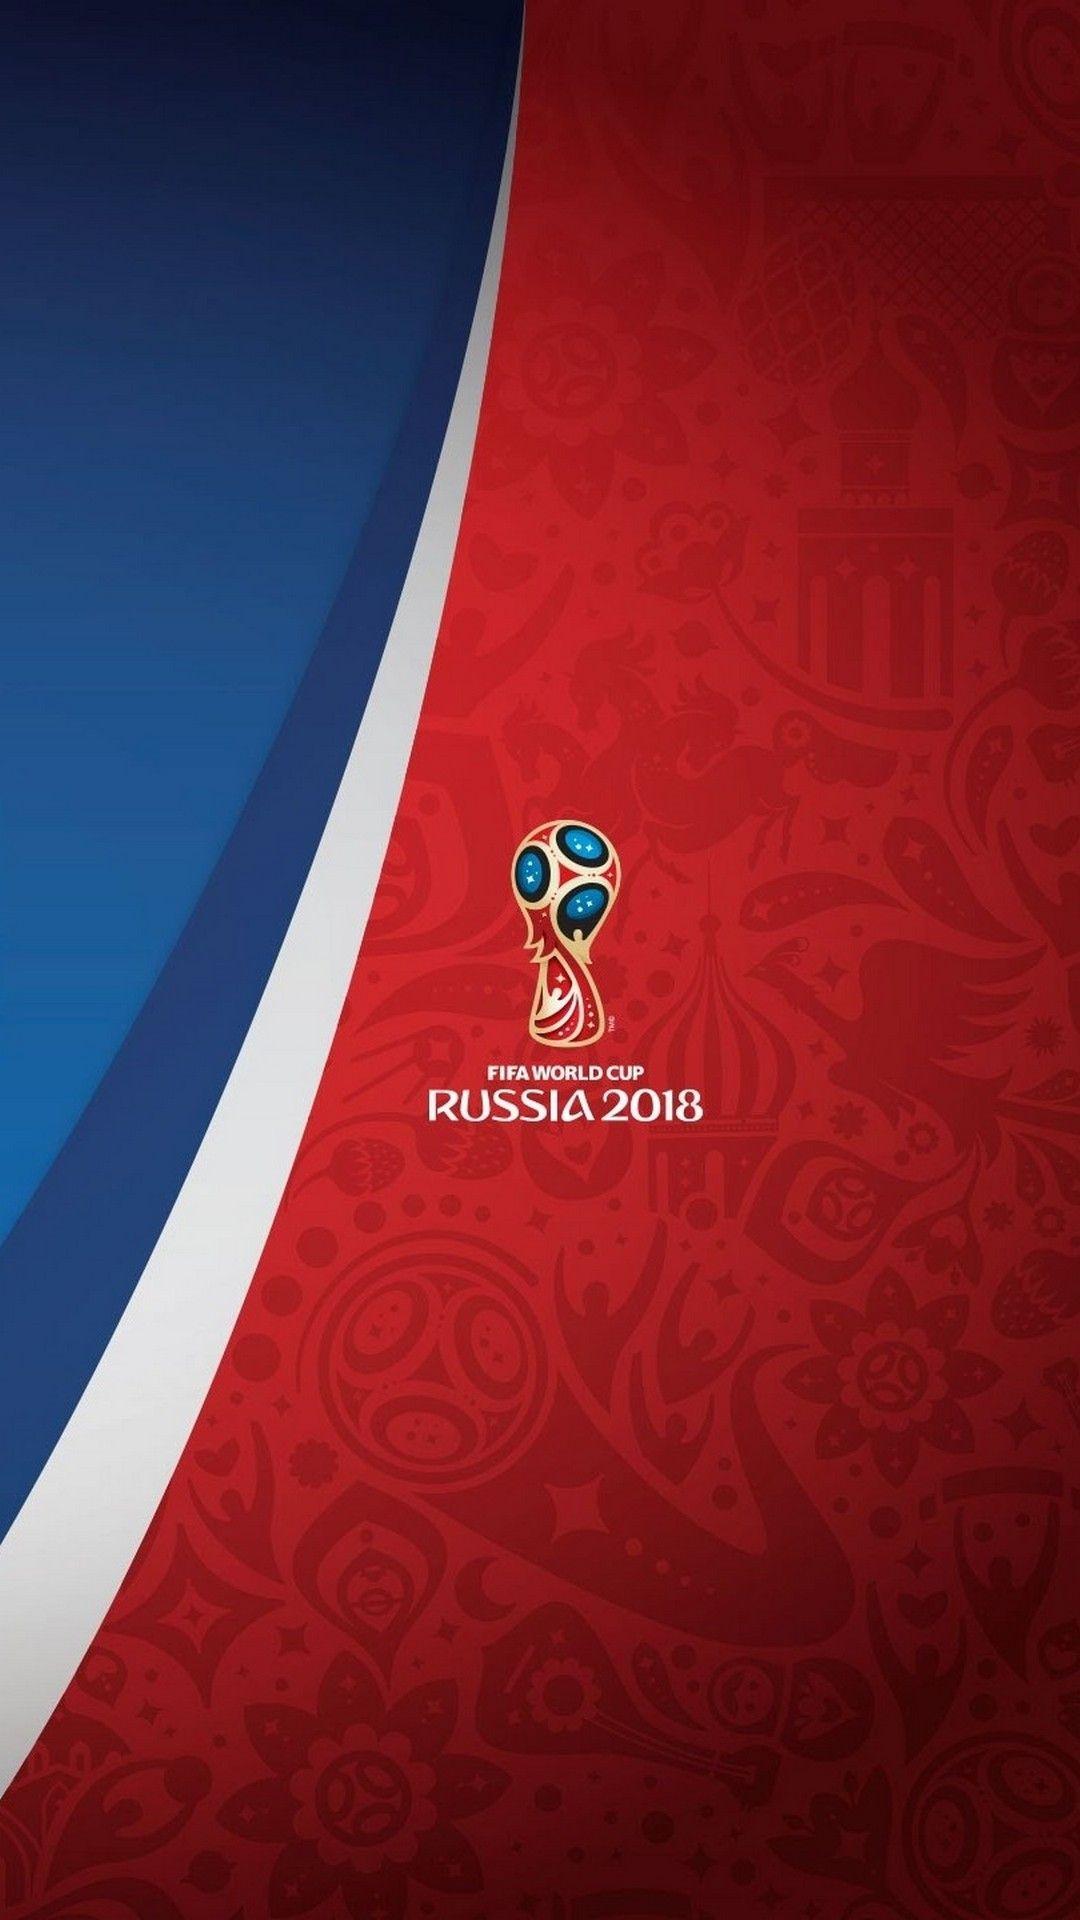 FIFA World Cup Russia. World cup .com